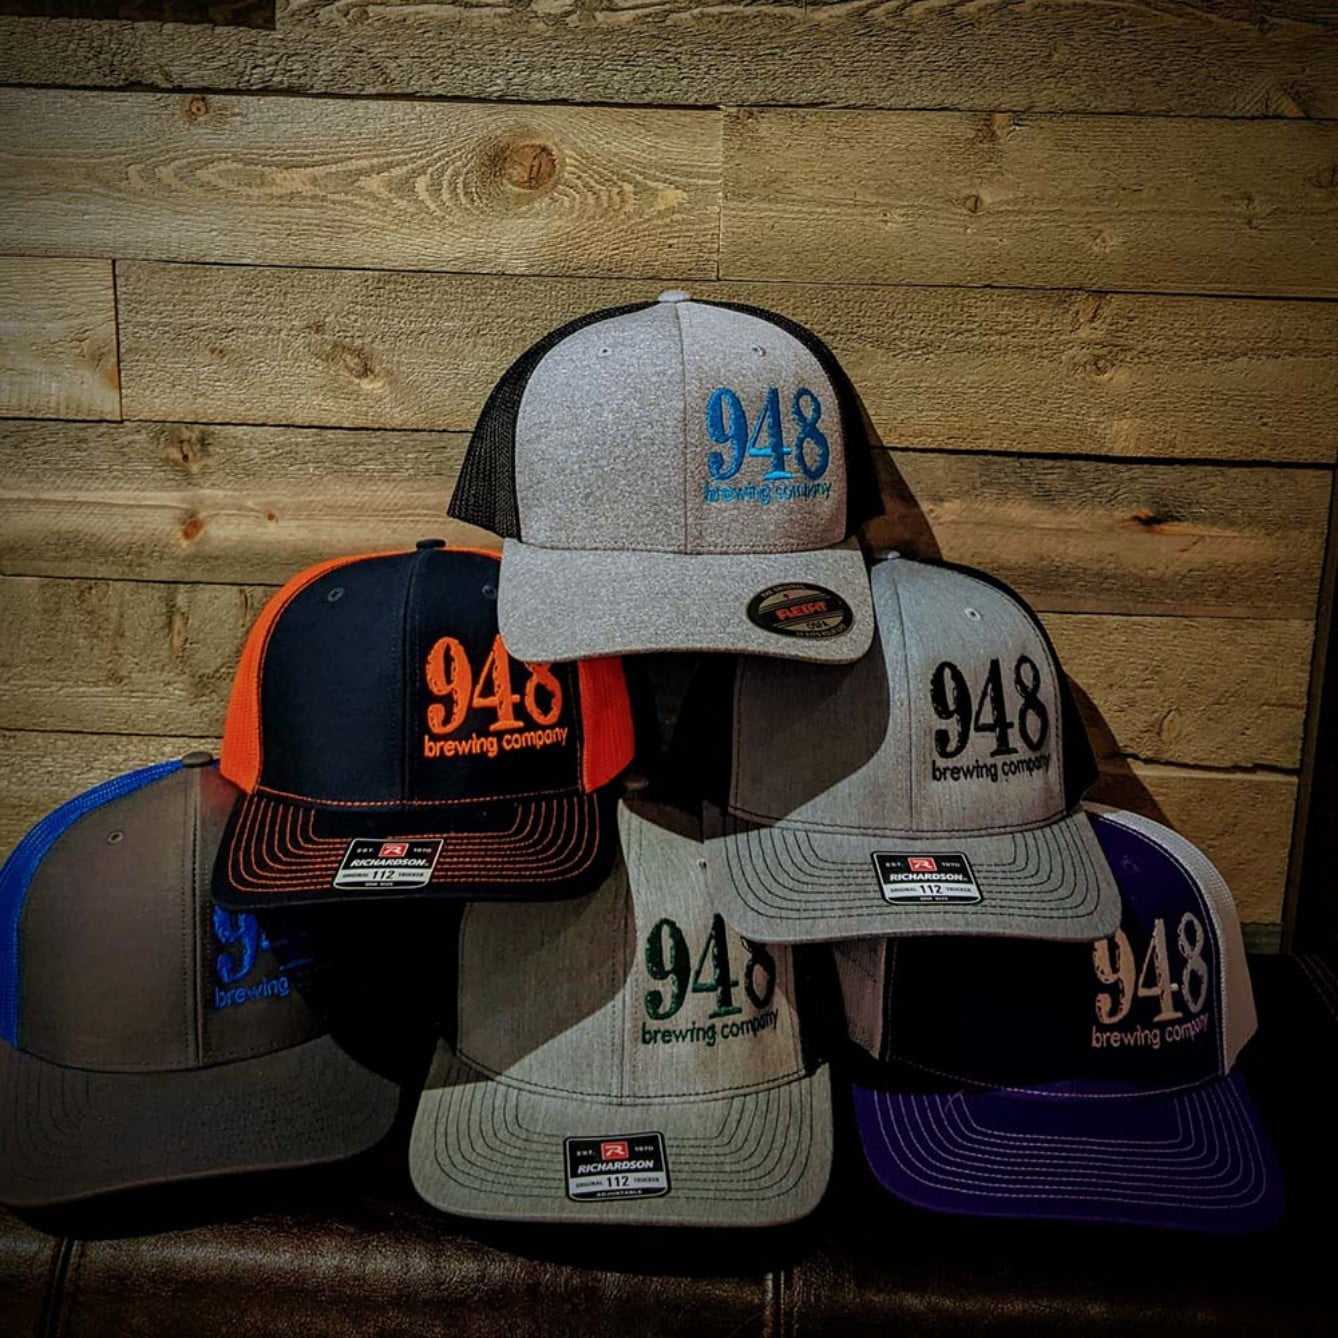 a pile of 948 Brewing Company hats